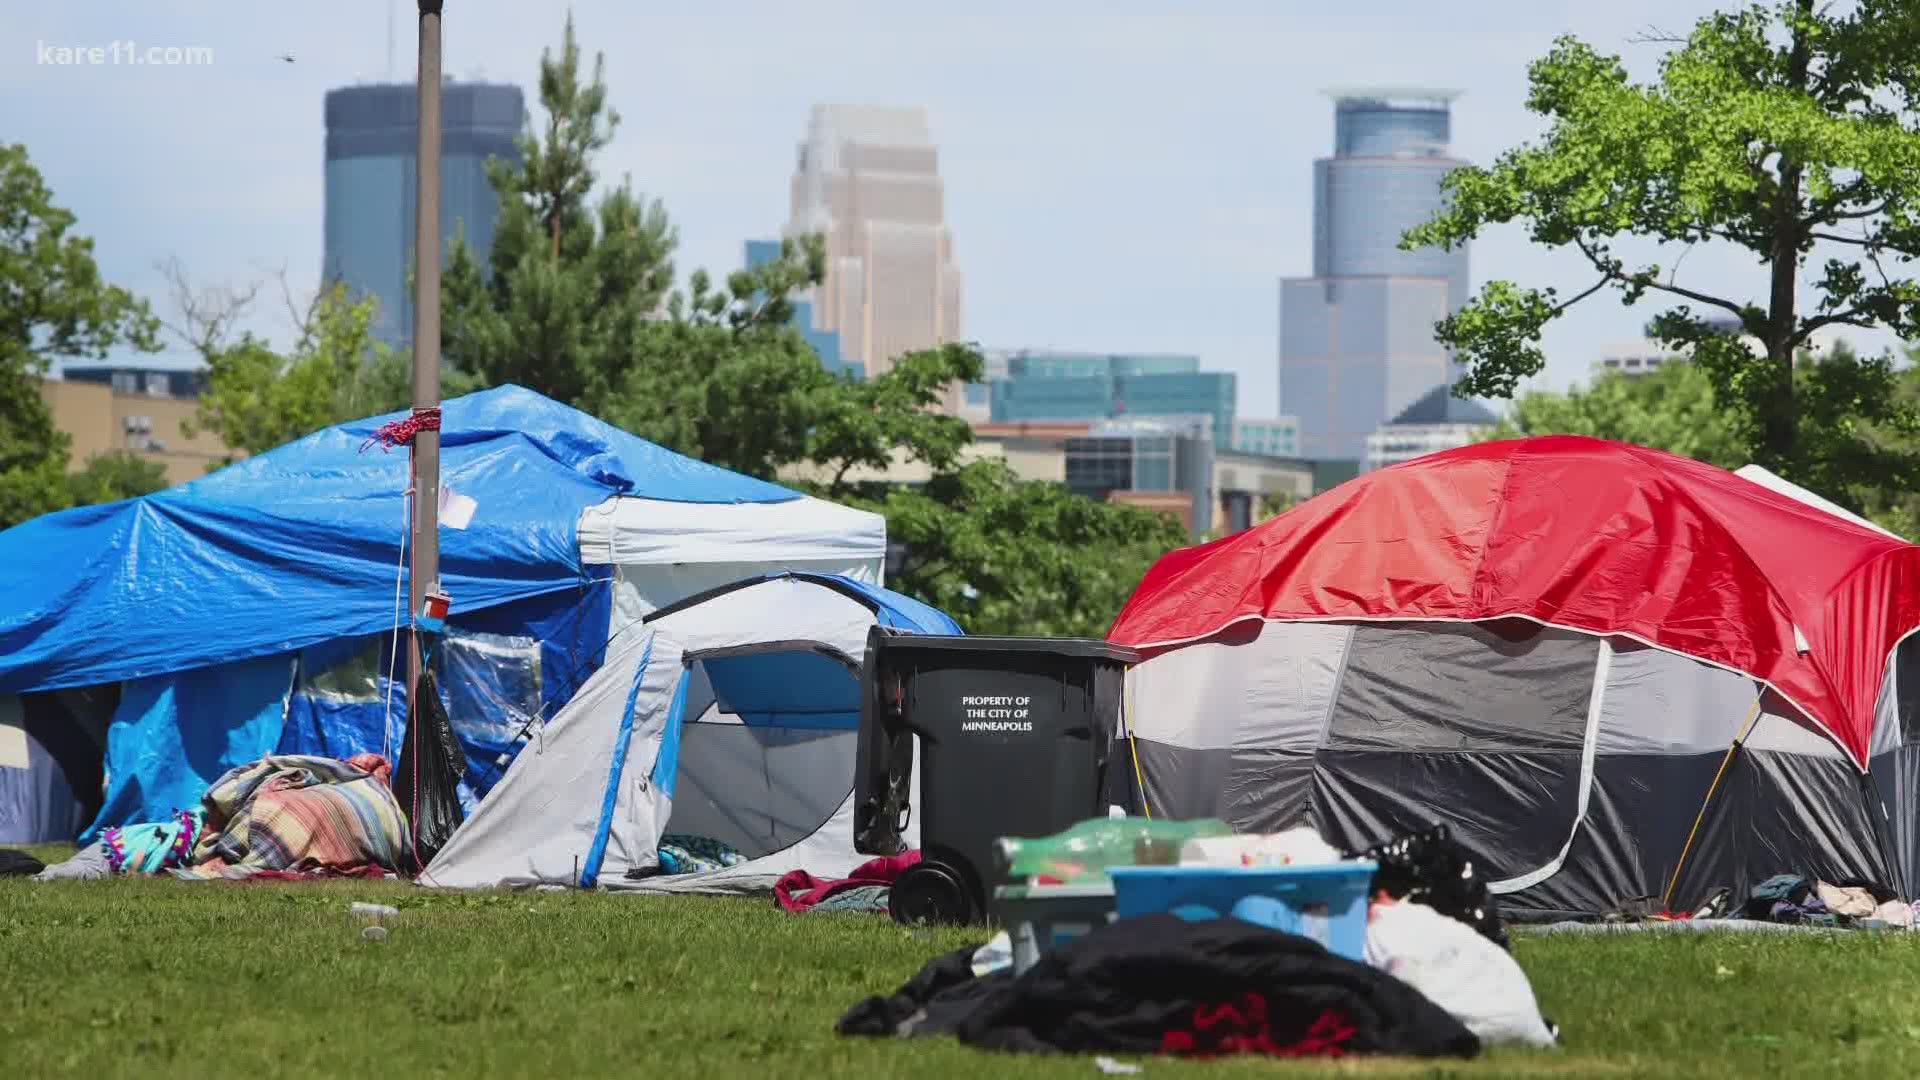 This comes after the board voted weeks ago to let the tent encampments in places like Powderhorn Park function as they were.